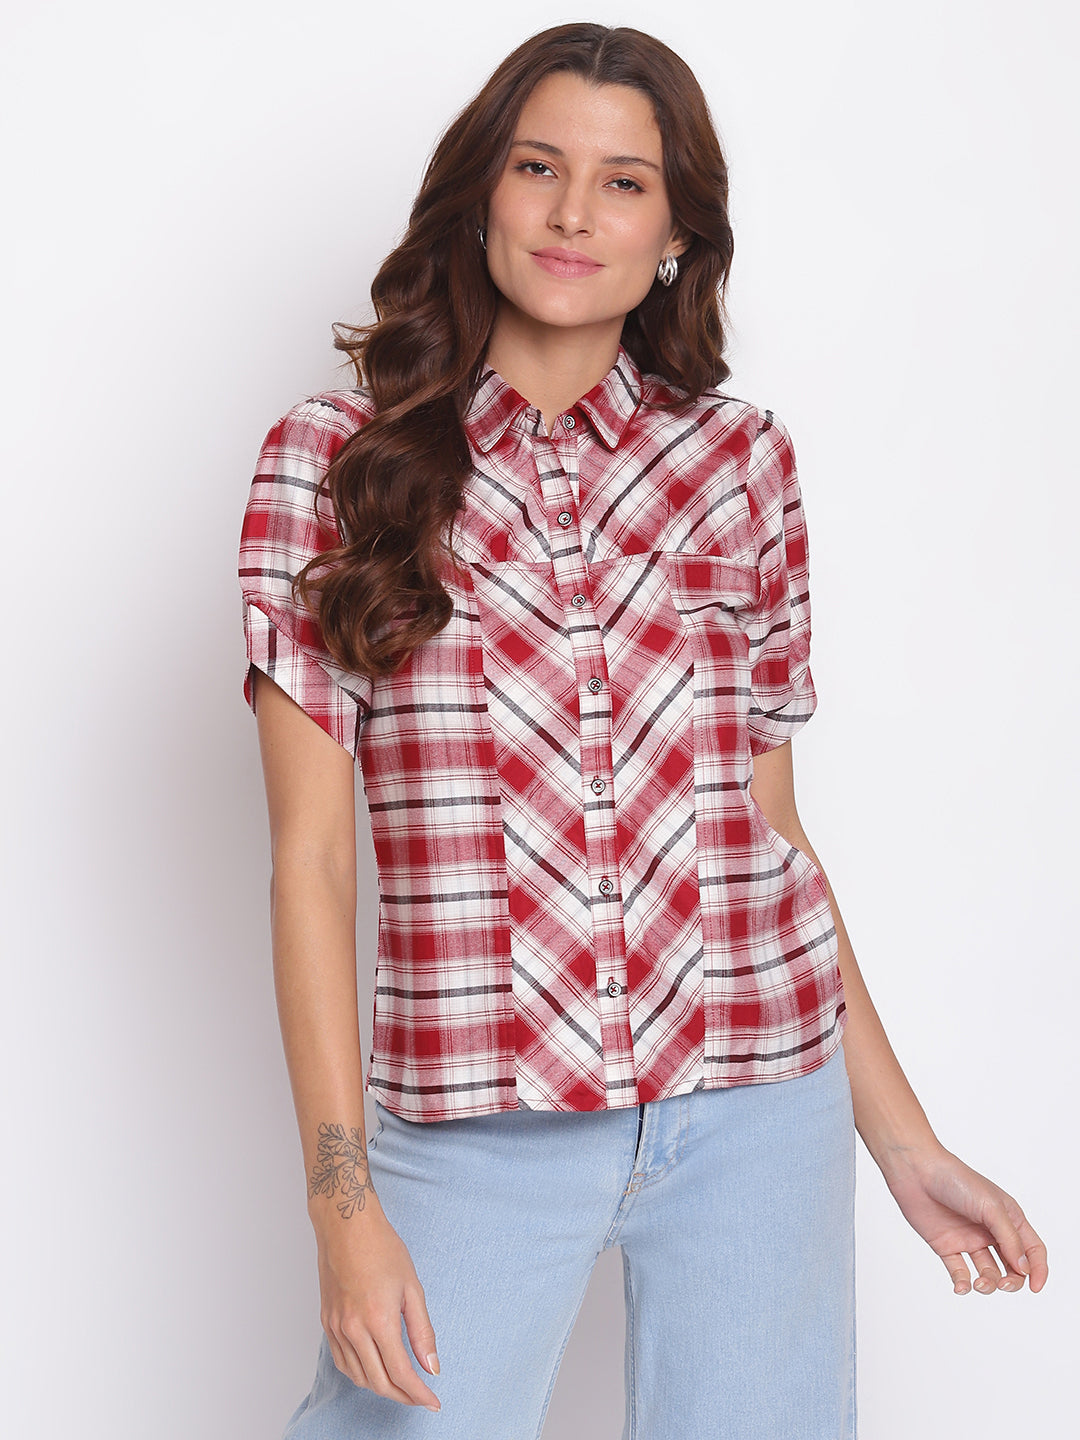 Winter Checked Half Sleeve Casual Shirt Top Multi Color